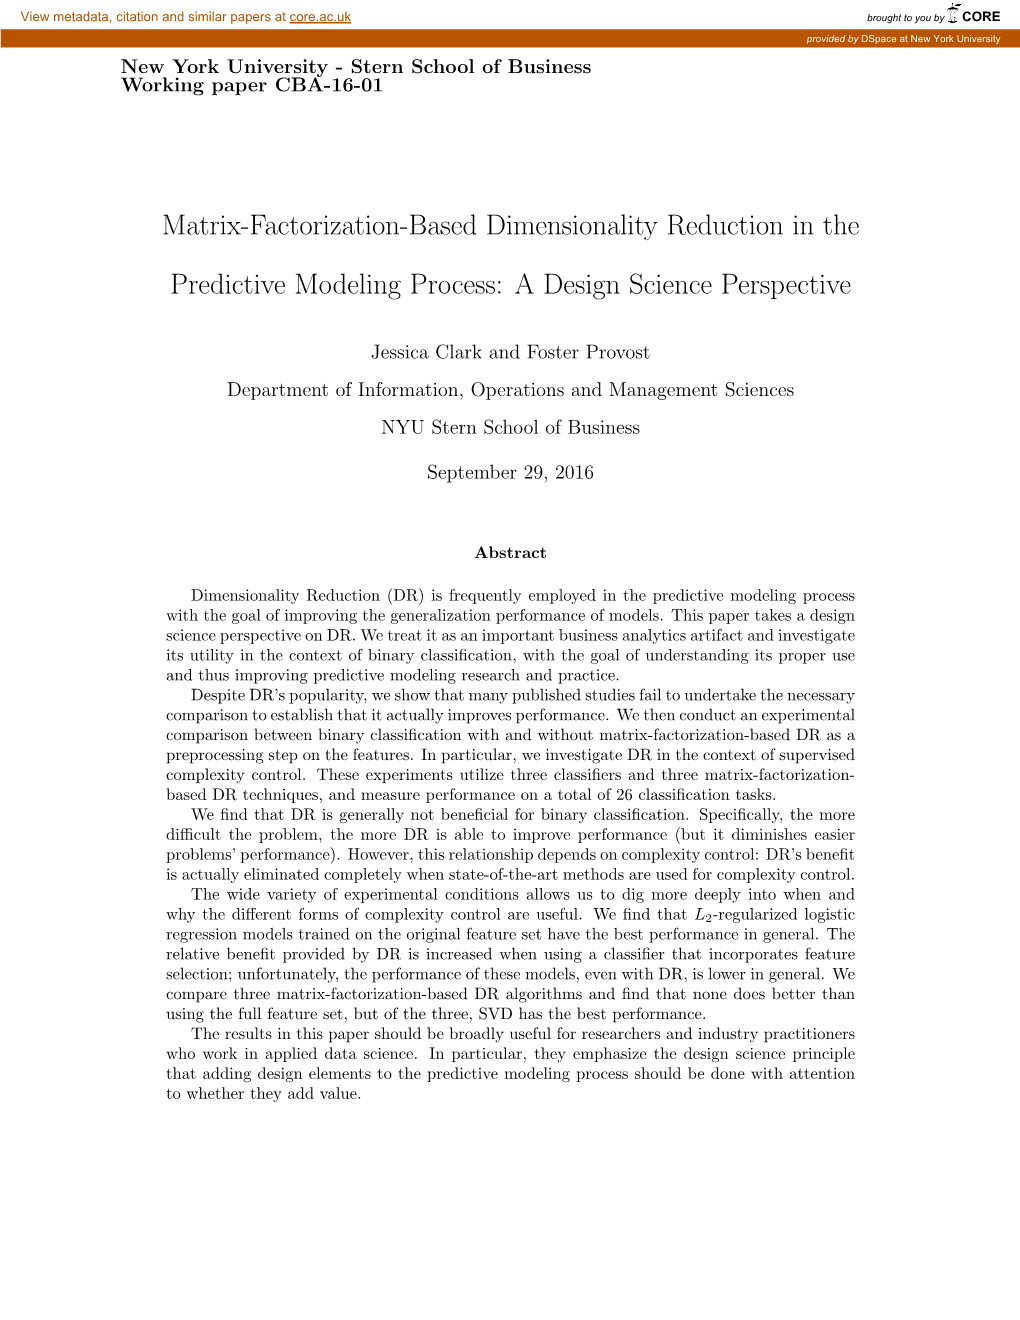 Matrix-Factorization-Based Dimensionality Reduction in the Predictive Modeling Process